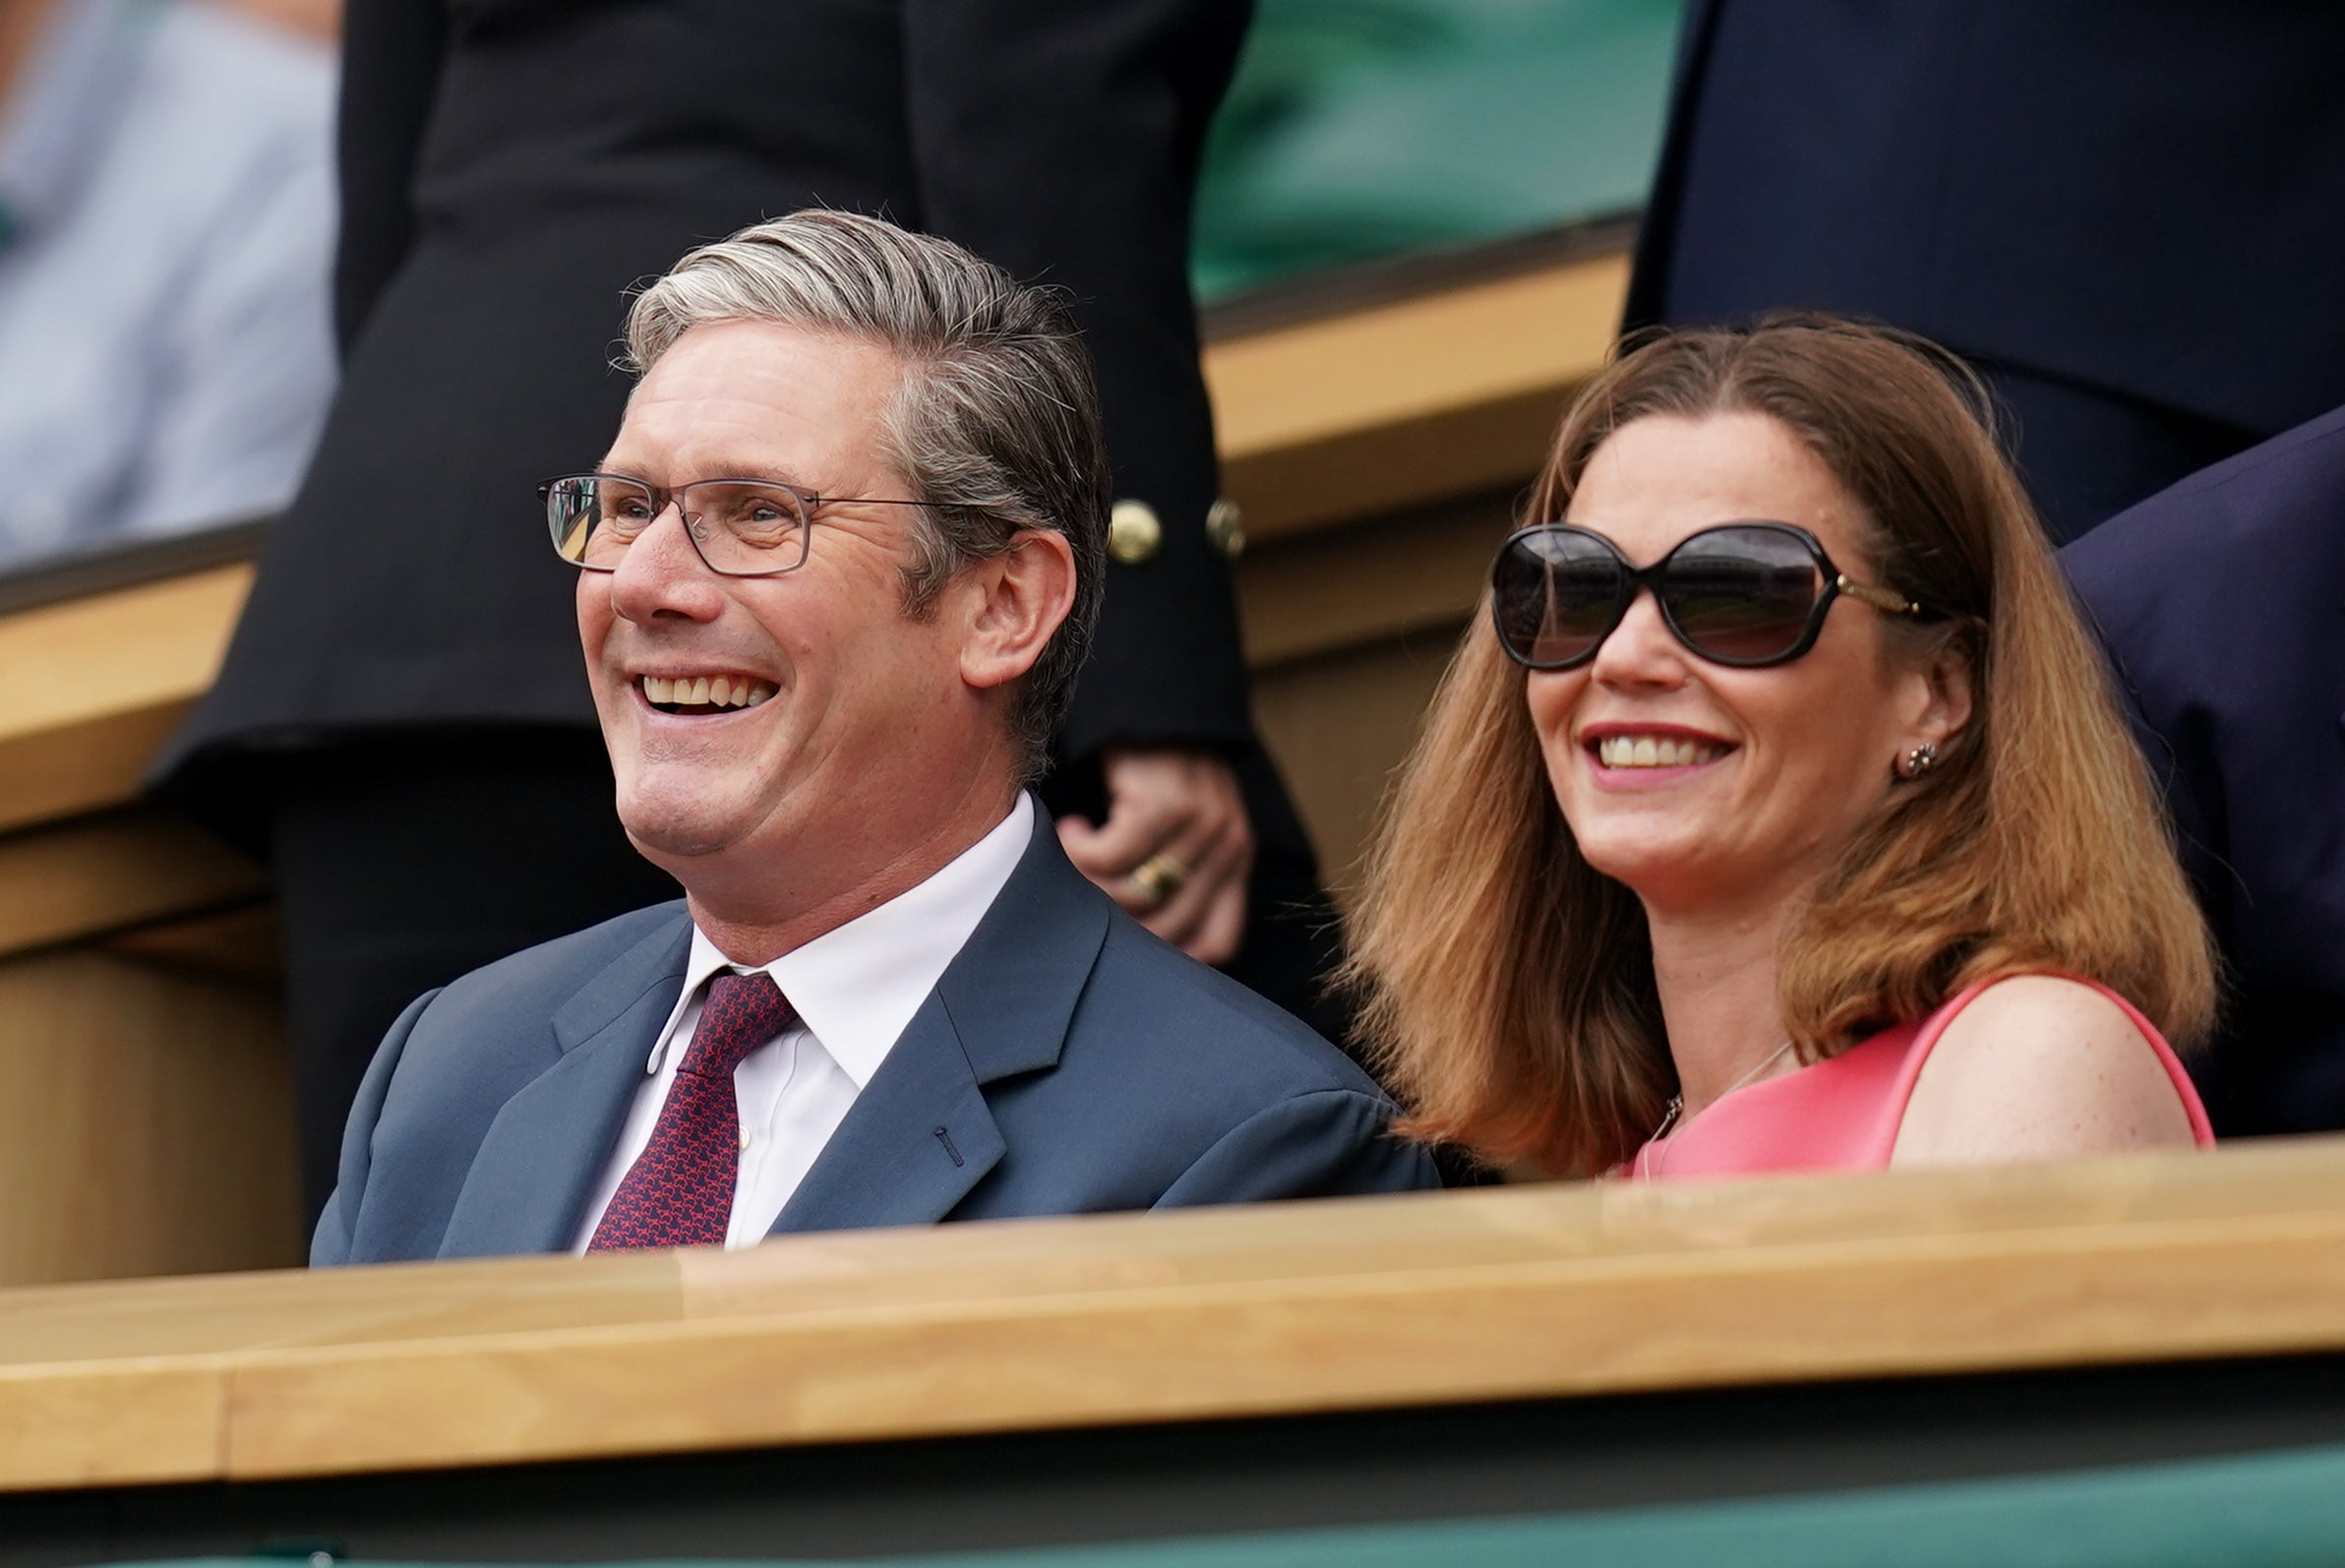 Sir Keir Starmer and wife, Victoria, in Wimbledon’s Royal Box on Thursday 7 July